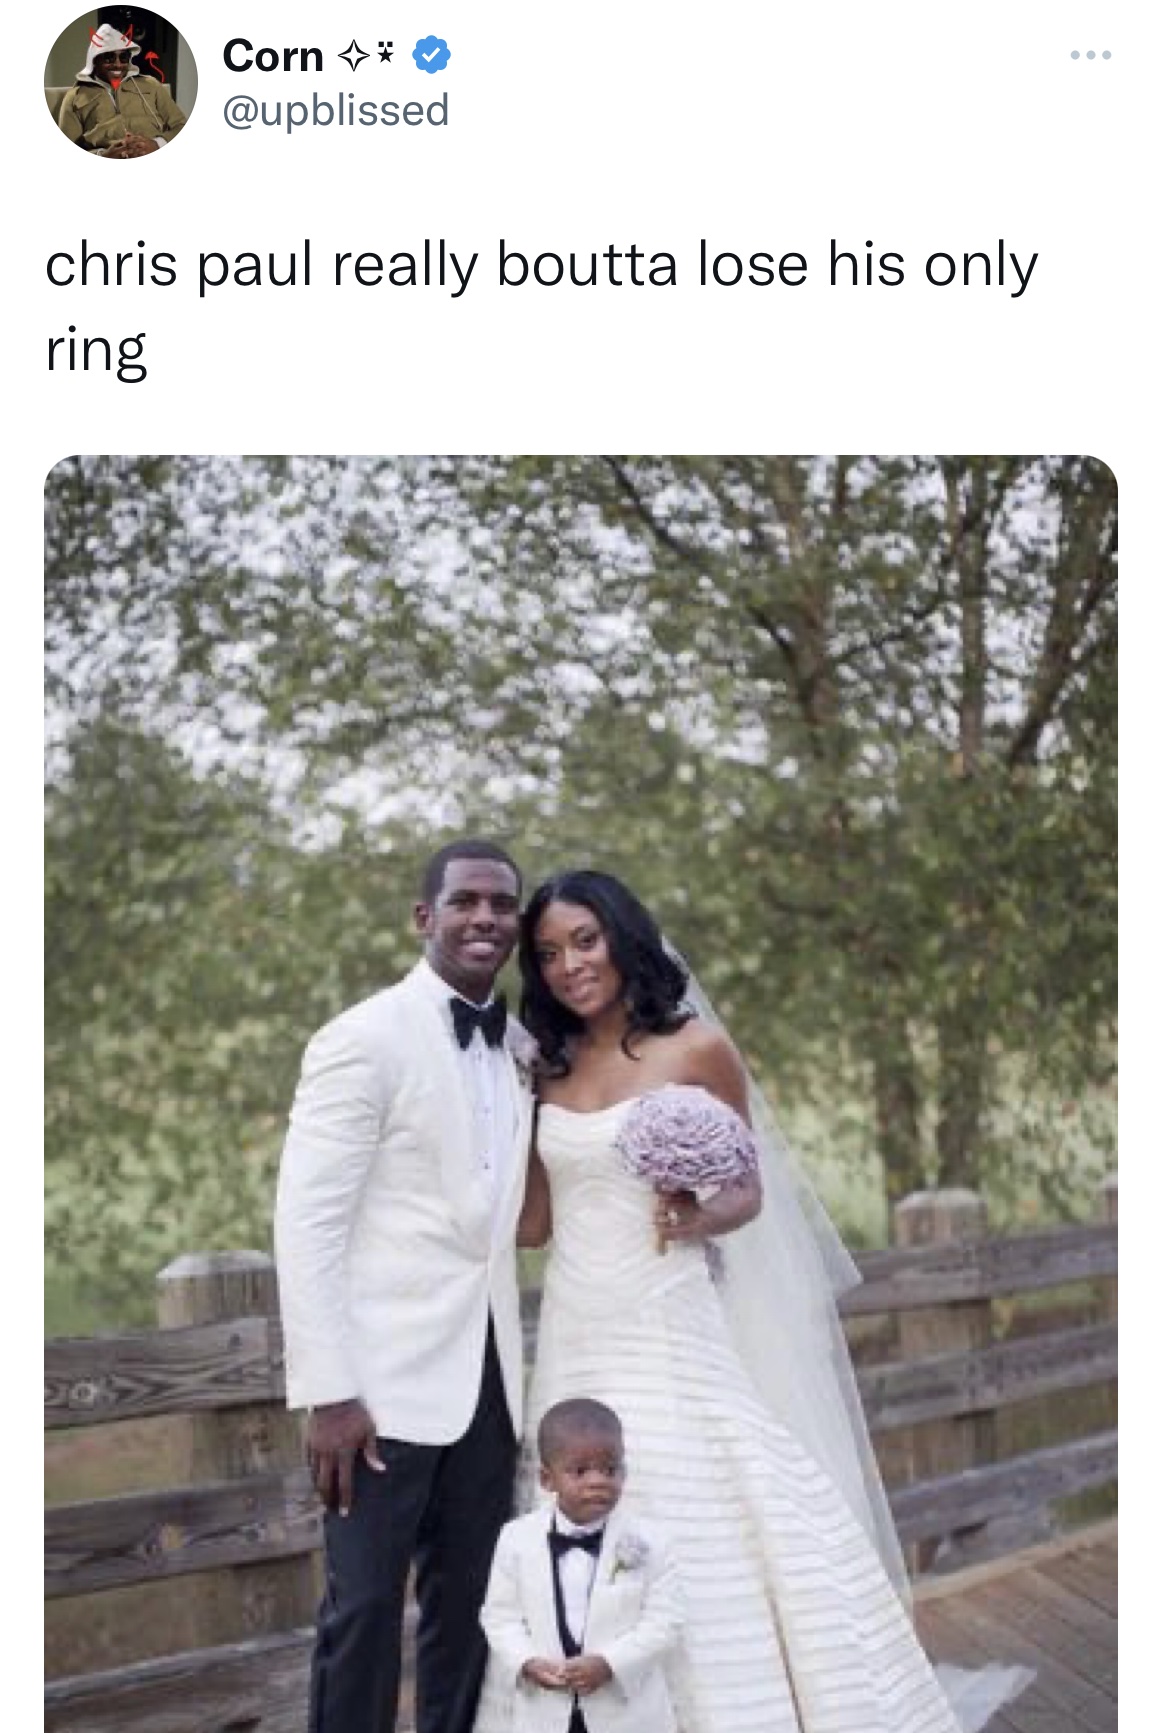 Chris Paul and Kim K memes - black couple in wedding dress - Corn chris paul really boutta lose his only ring ...